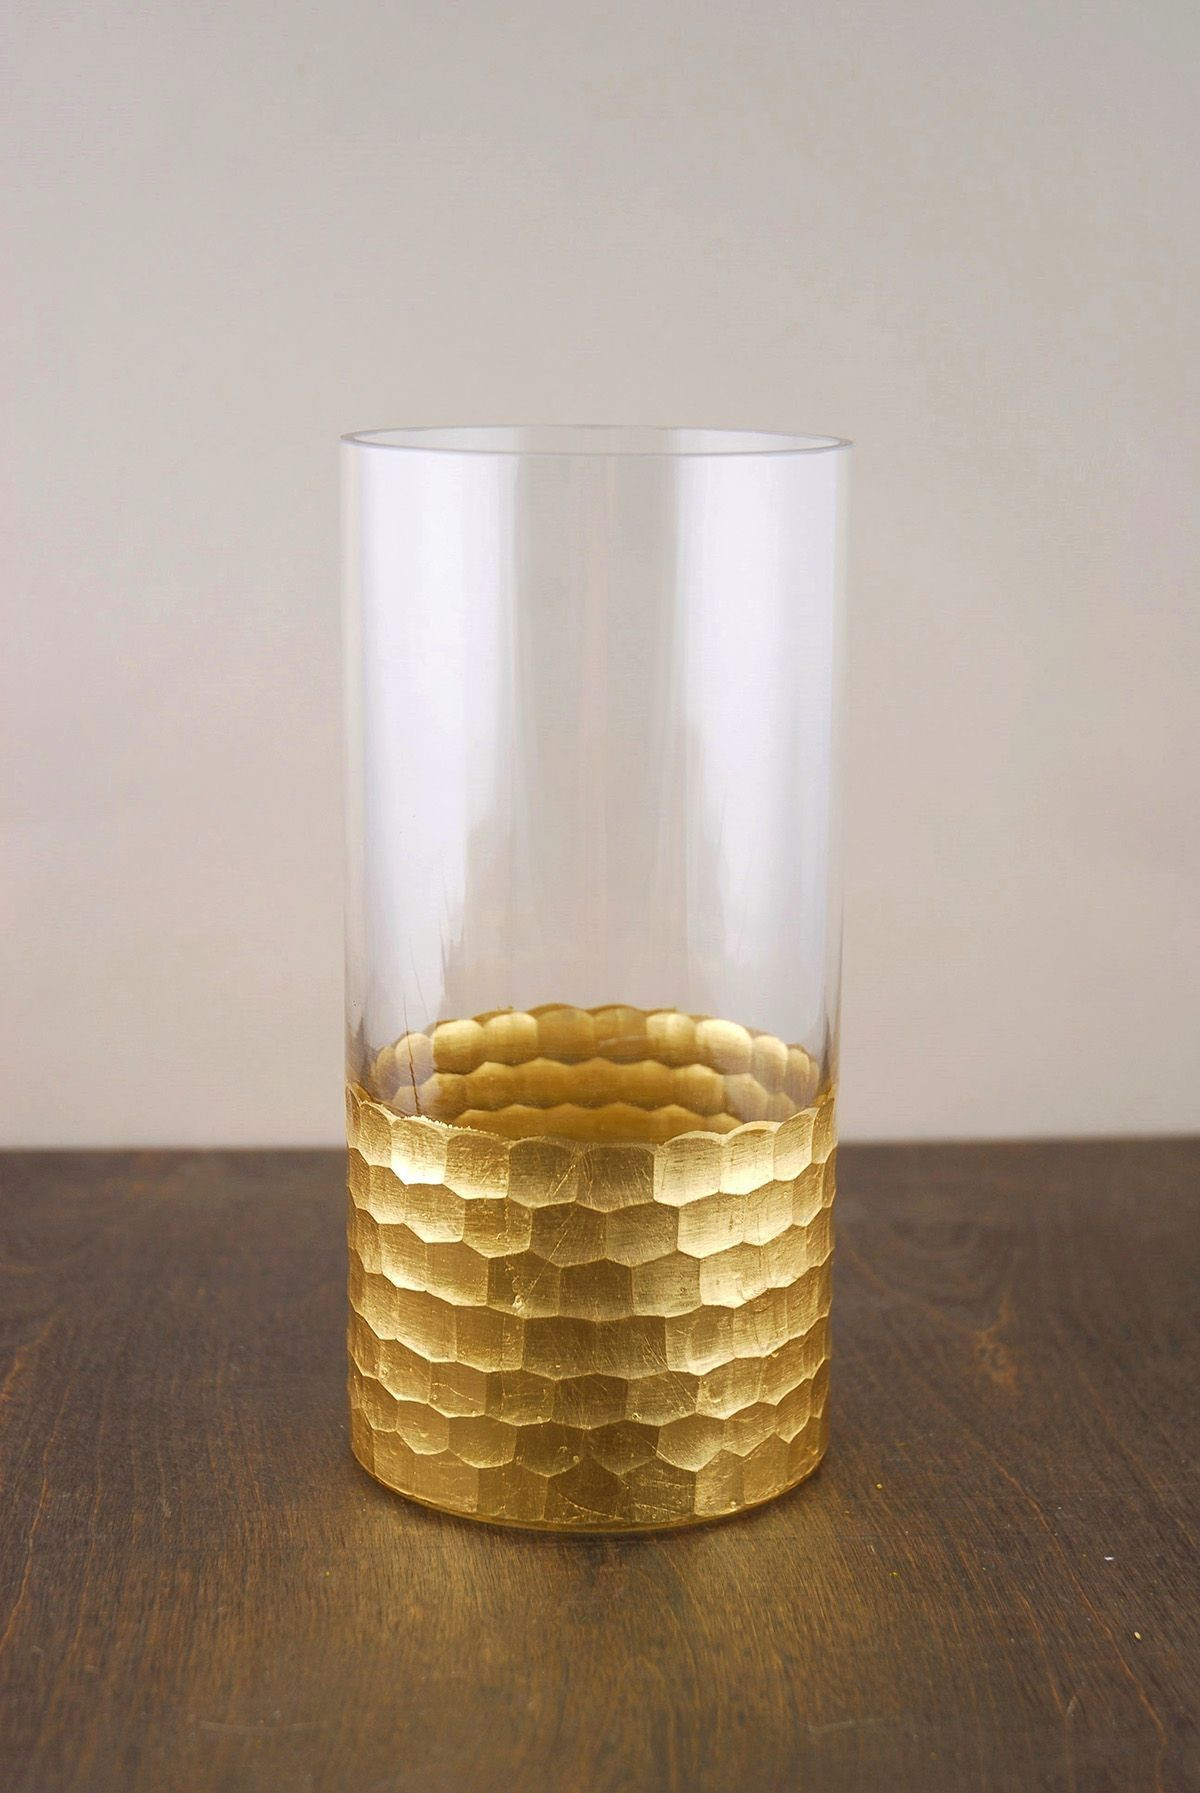 10 Perfect Red Mercury Glass Vase 2024 free download red mercury glass vase of gold mercury glass vases inspirational gold cylinder vases with regard to gold mercury glass vases inspirational gold cylinder vases collection silver and gold merc